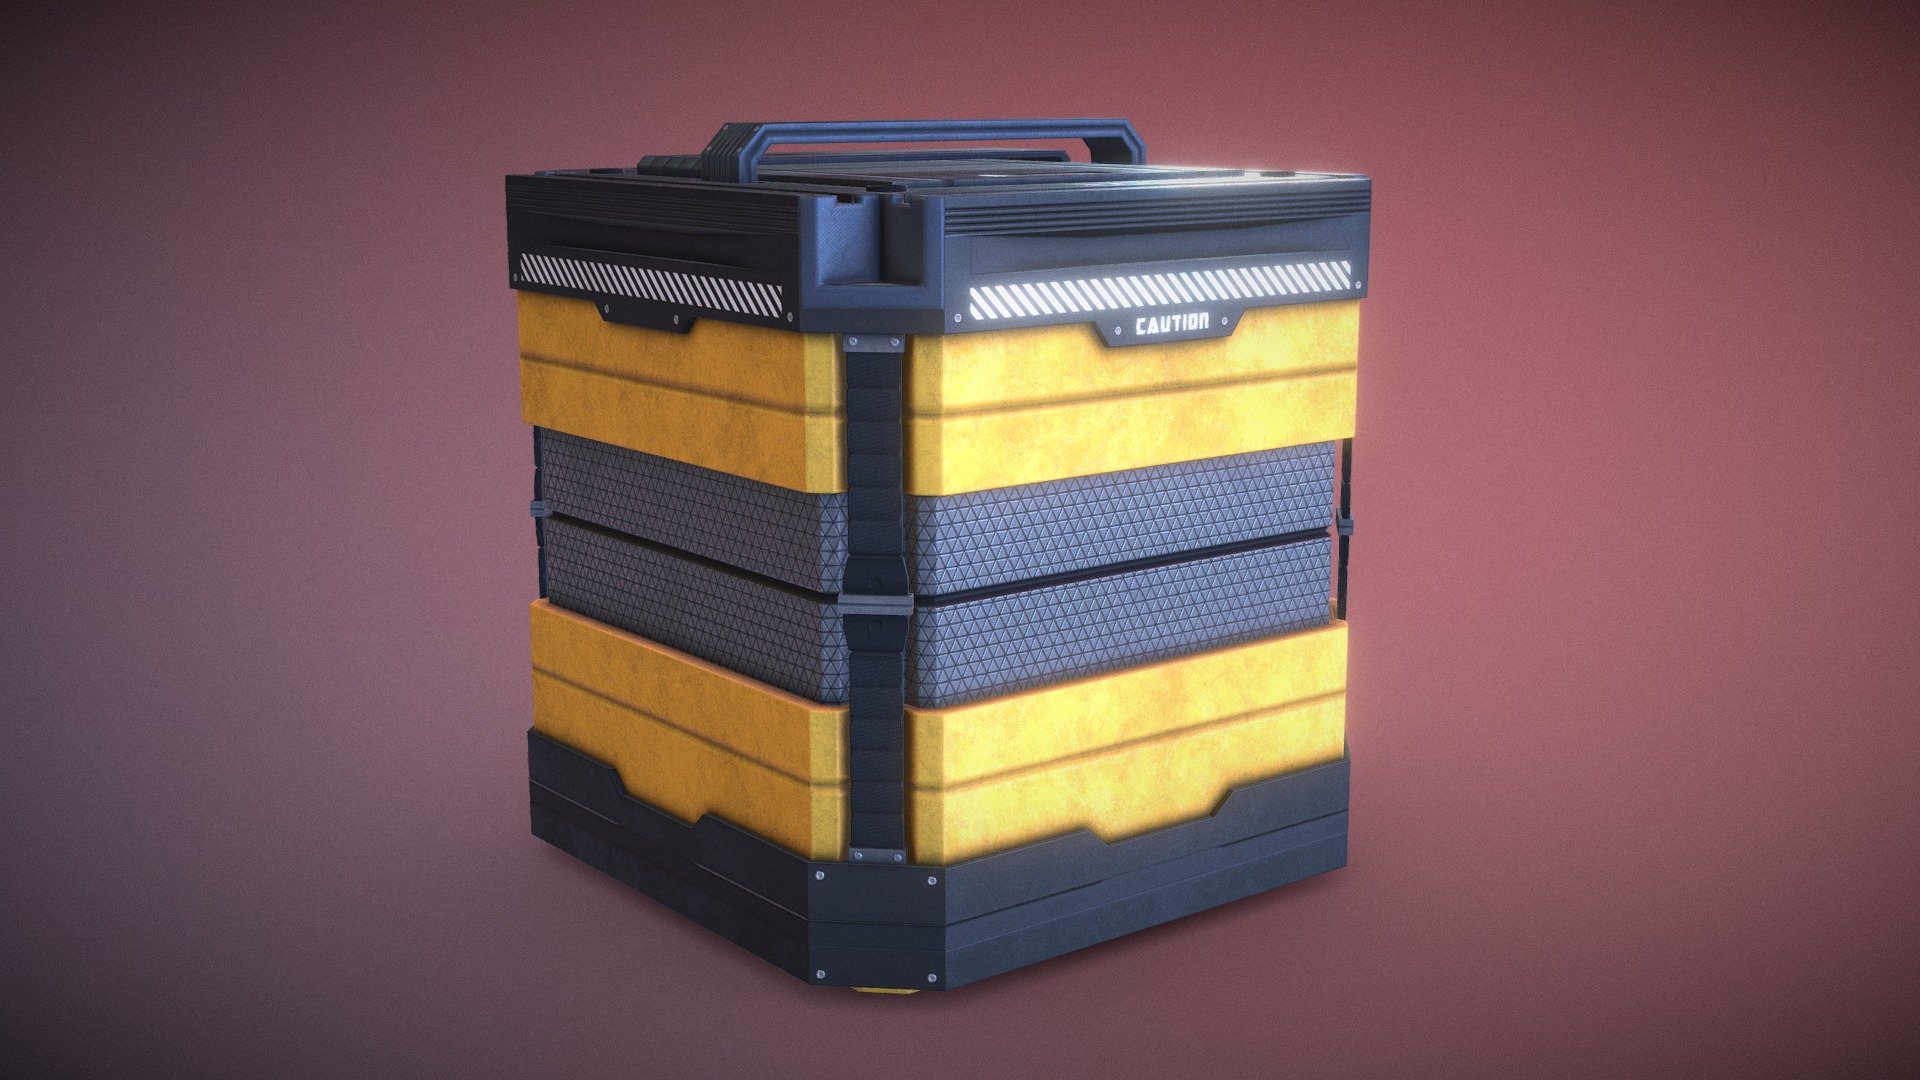 ➥ Sci-Fi Crate for any game project with only 3.8k Triangles.

➥ 3 Materials (Box_MAT, Chasis_MAT and Extras_MAT with x4096 textures)

➥ Unity Prefab model with materials included (Unity 5 Autodesk Interactive shader):

Preview Prefab

IMPORTANT!!! Exported with Unity 2019.3.15f1

➥ Additional .zip that includes:




Blender Editable File (Included Low Poly Unwrapped with textures and HighPoly Original mesh without textures, used for bakes).




Textures




Unity Package (Model, Material, Textures and Prefab)




Original LP FBX




Thank you message :)



➥ Some Extra Screenshots:
Preview Blender Editable - Sci-Fi Crate - Buy Royalty Free 3D model by Agustín Hönnun (@Agustin_Honnun) 3d model